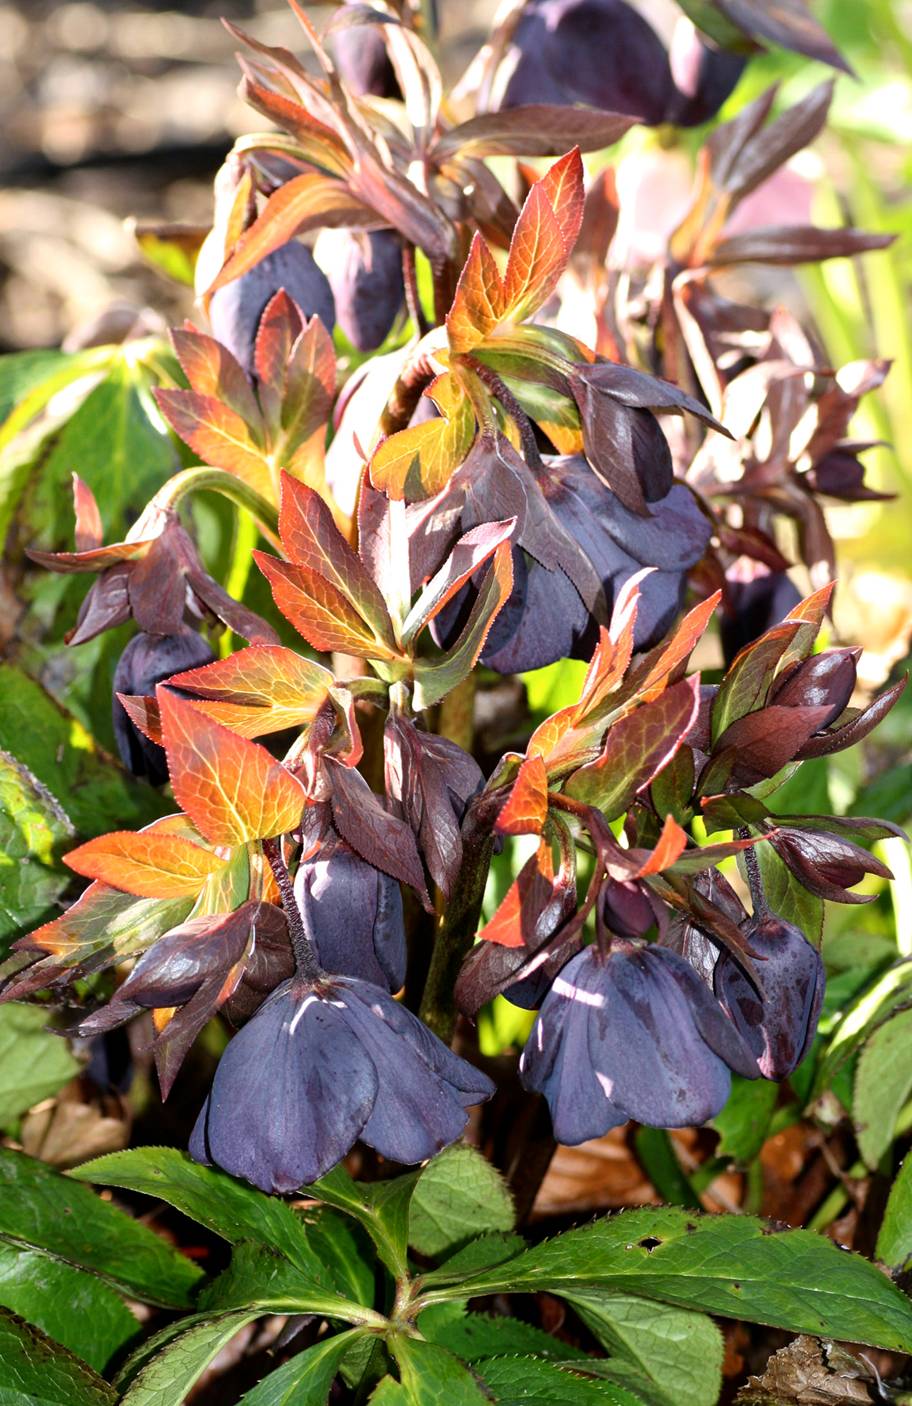 Black plants seem to lack color, but they actually demonstrate an overabundance of anthocyanins, which are pigment compounds found in flowers and fruits. Their blackness is actually deep blue, red or another combination that appears black in sunlight.